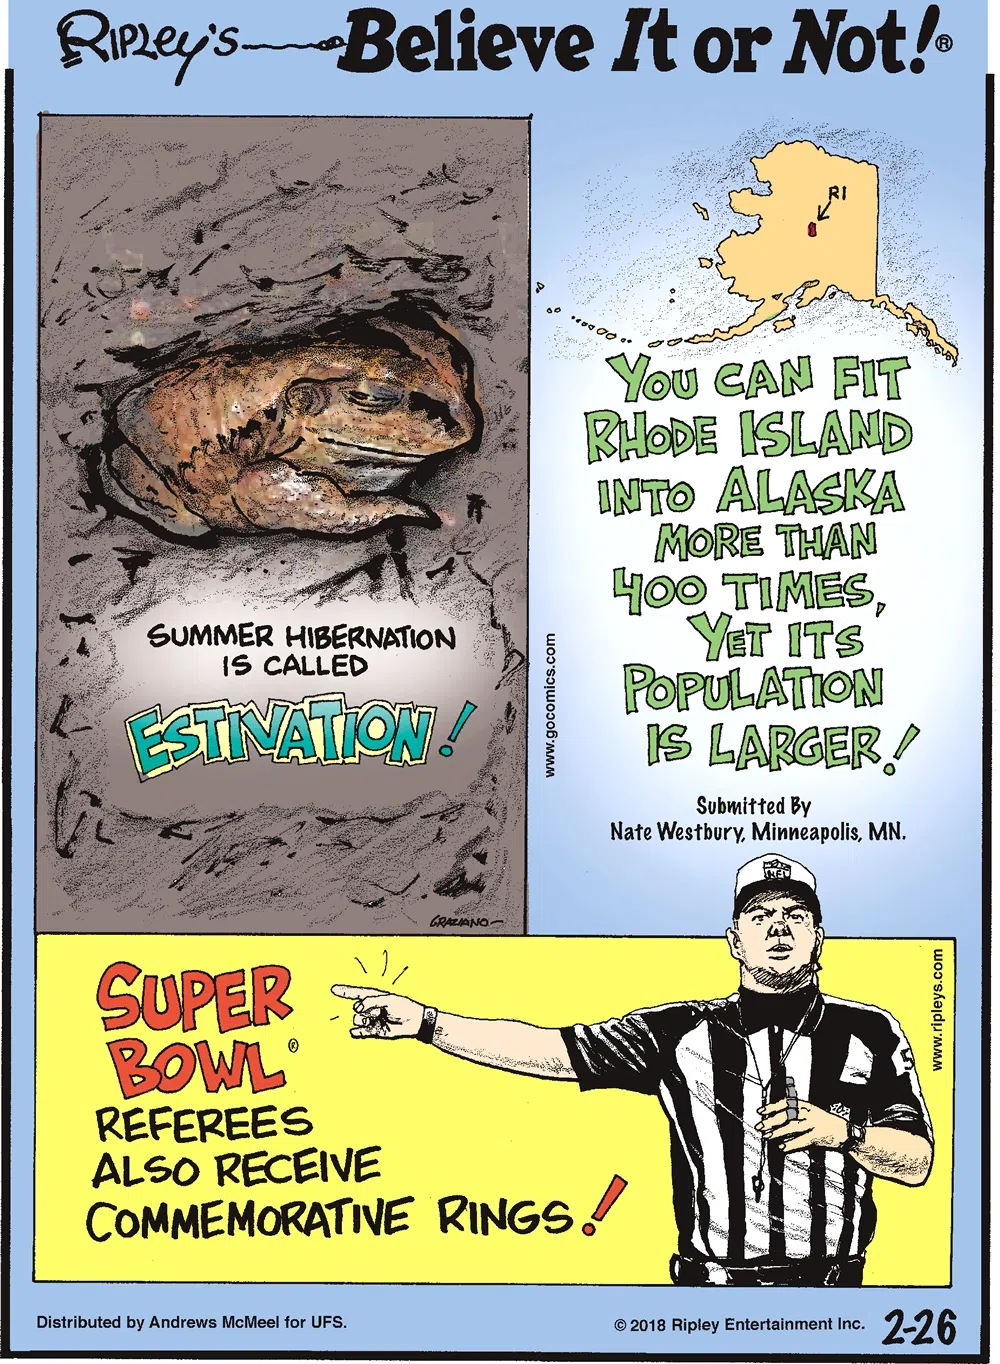 Summer hibernation is called estivation!-------------------- You can fit Rhode Island into Alaska more than 400 times, yet its population is larger! Submitted by Nate Westbury, Minneapolis, MN.-------------------- Super Bowl referees also receive commemorative rings!